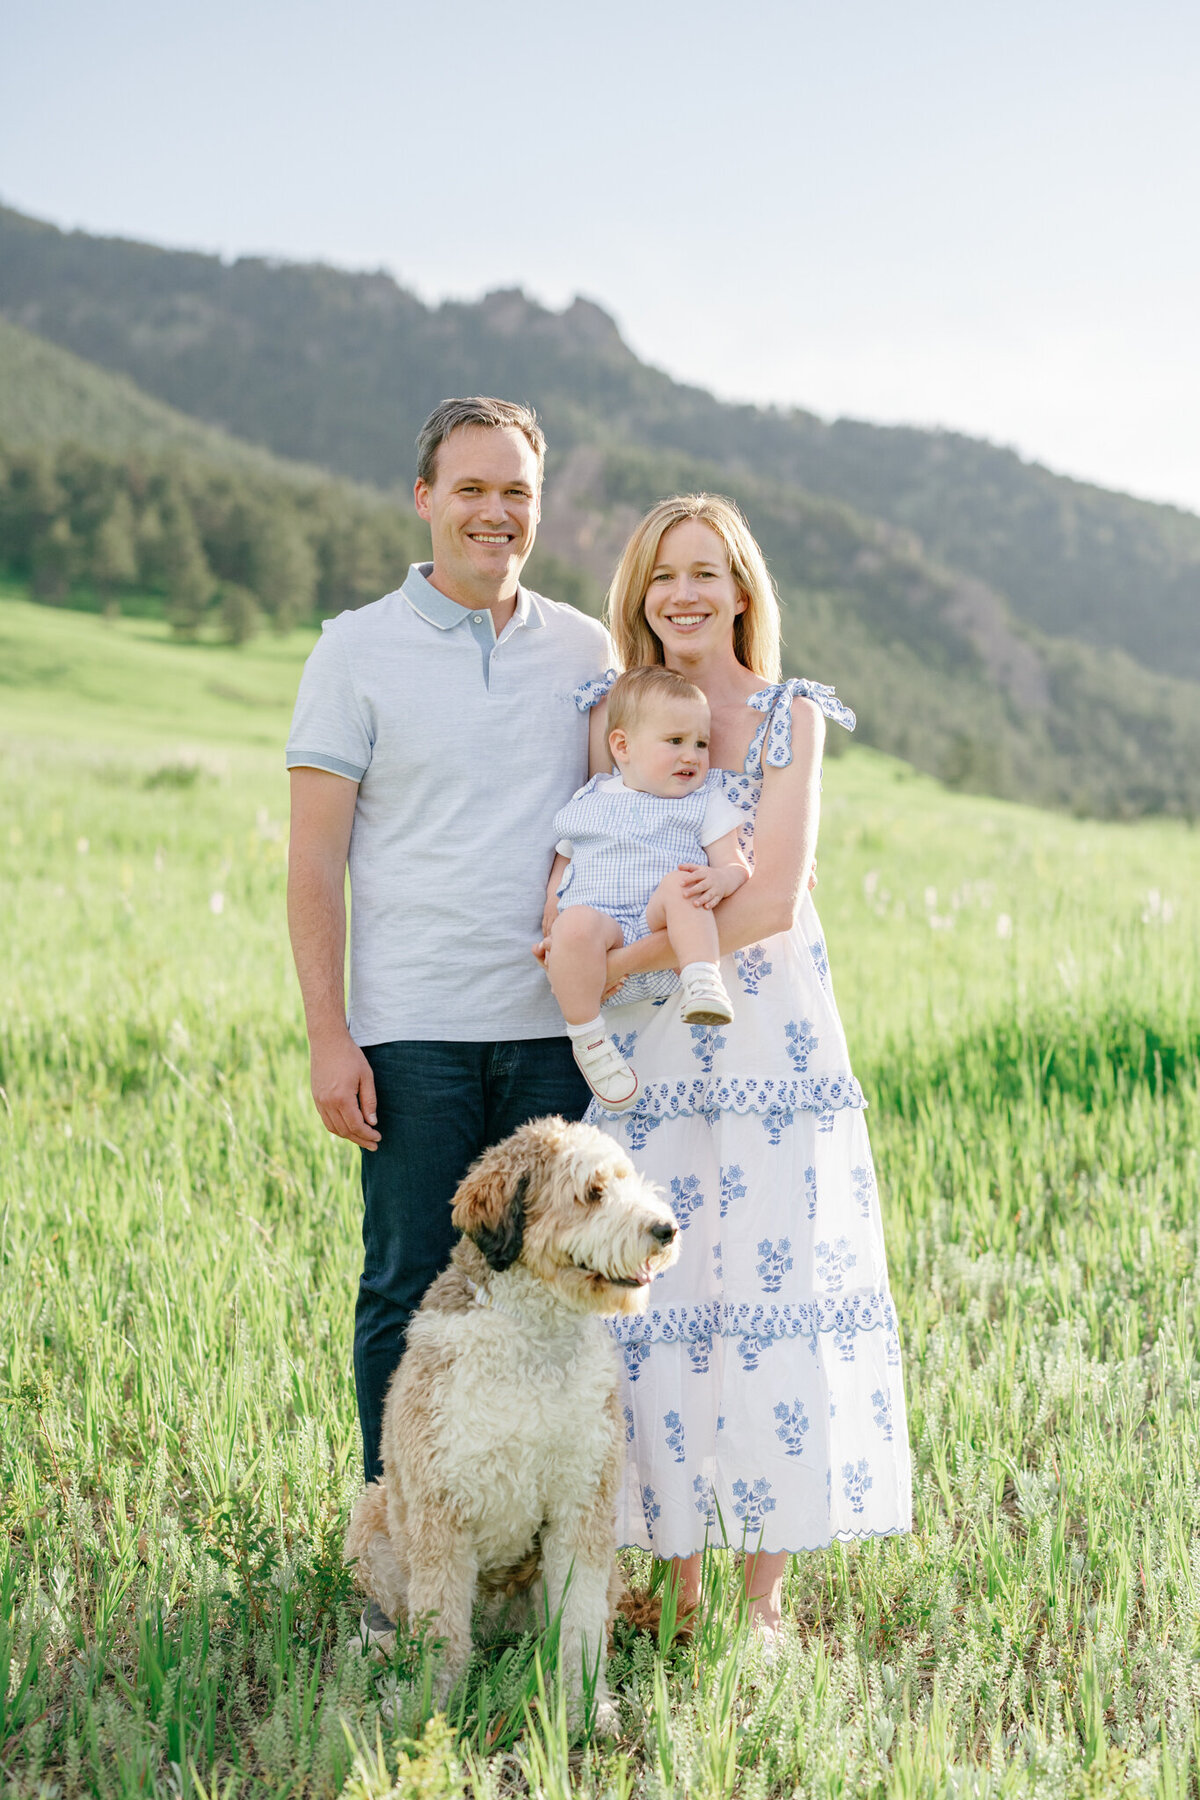 Spring-Time-Family-Portraits-Chautauqua-17_Olive and Aster